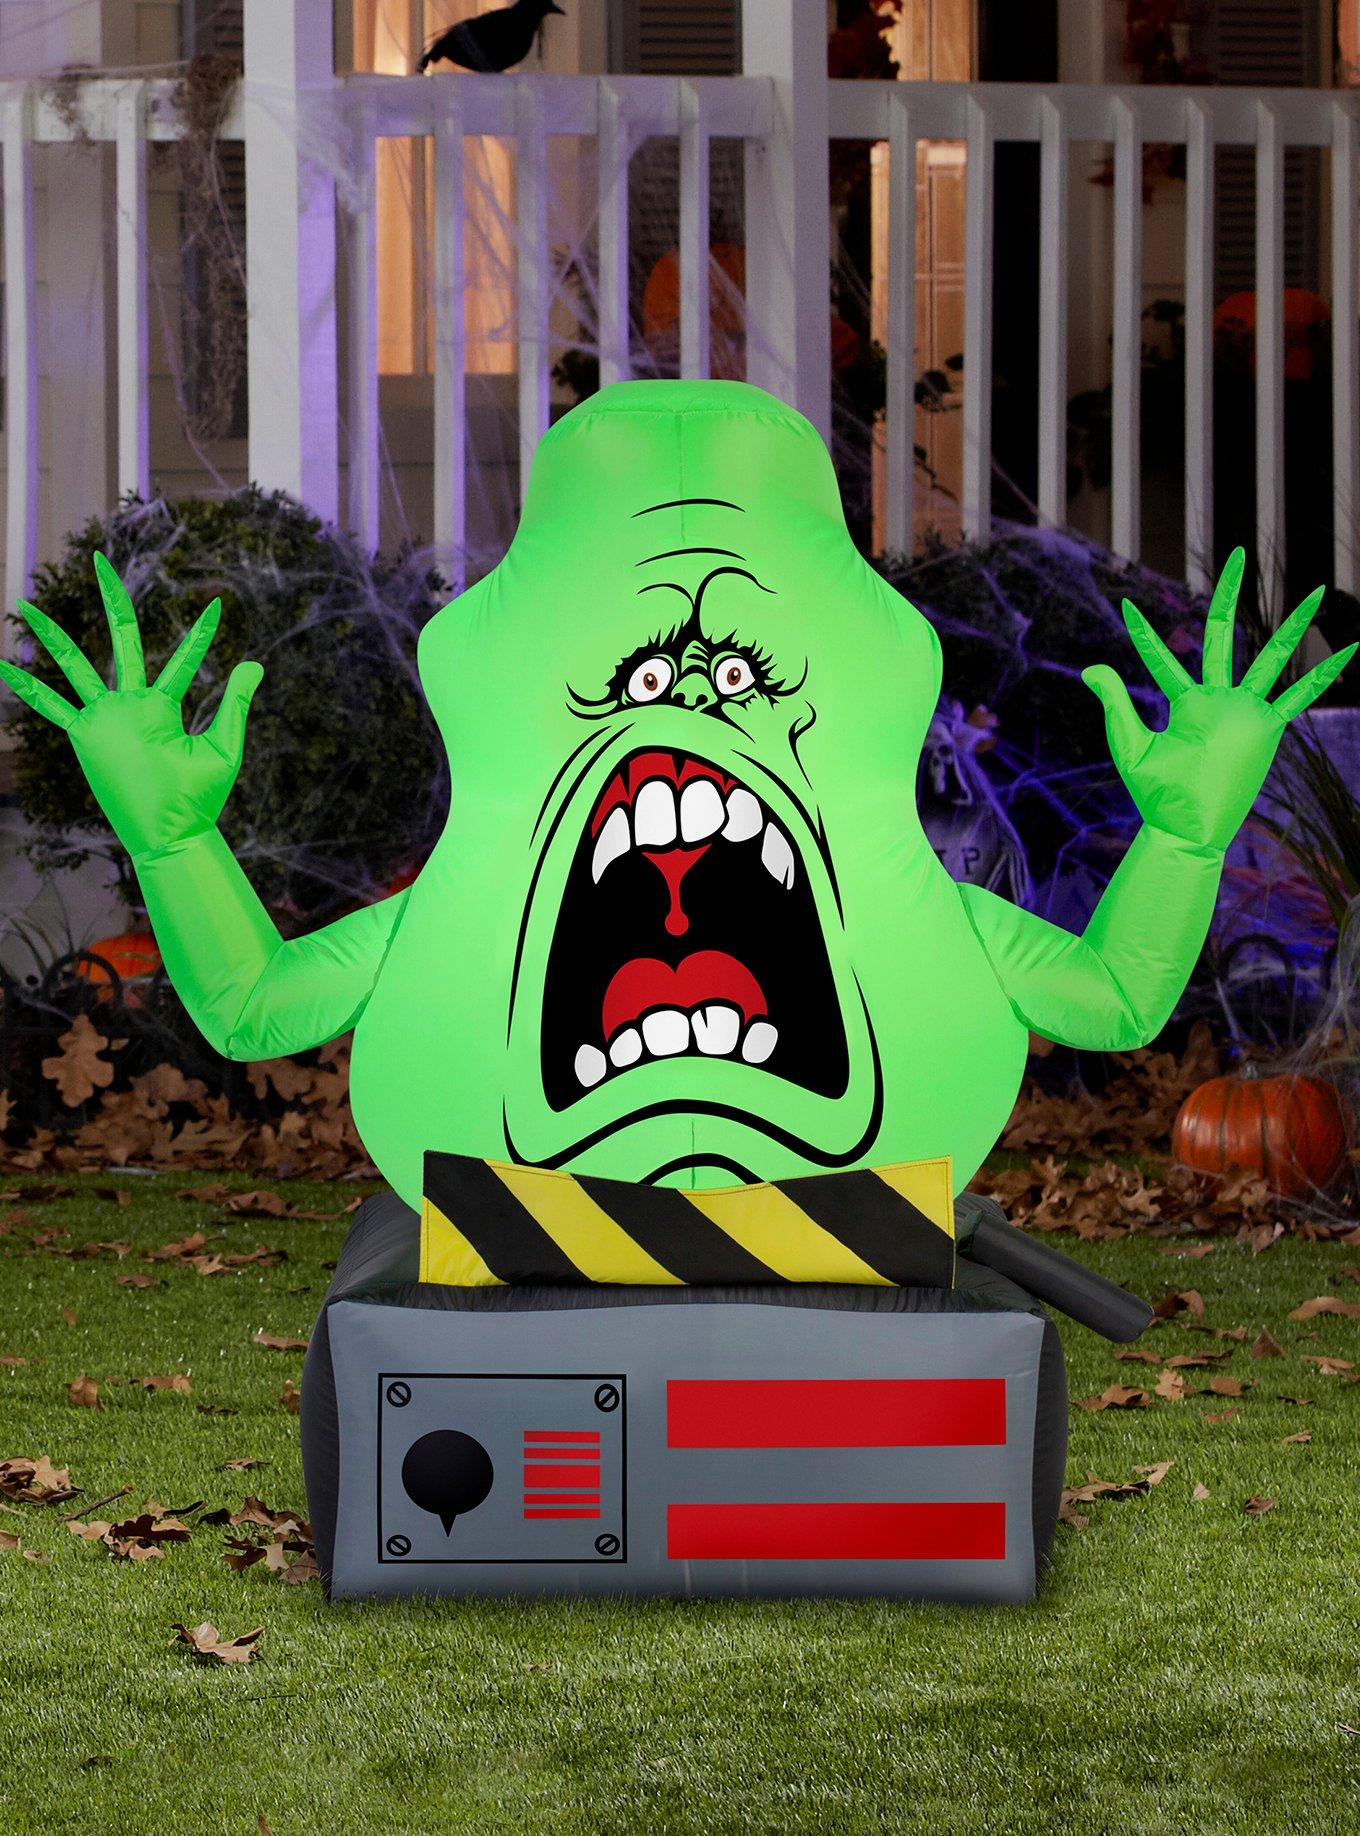 Ghostbusters Slimer Ghost Trap Inflatable Décor, , alternate